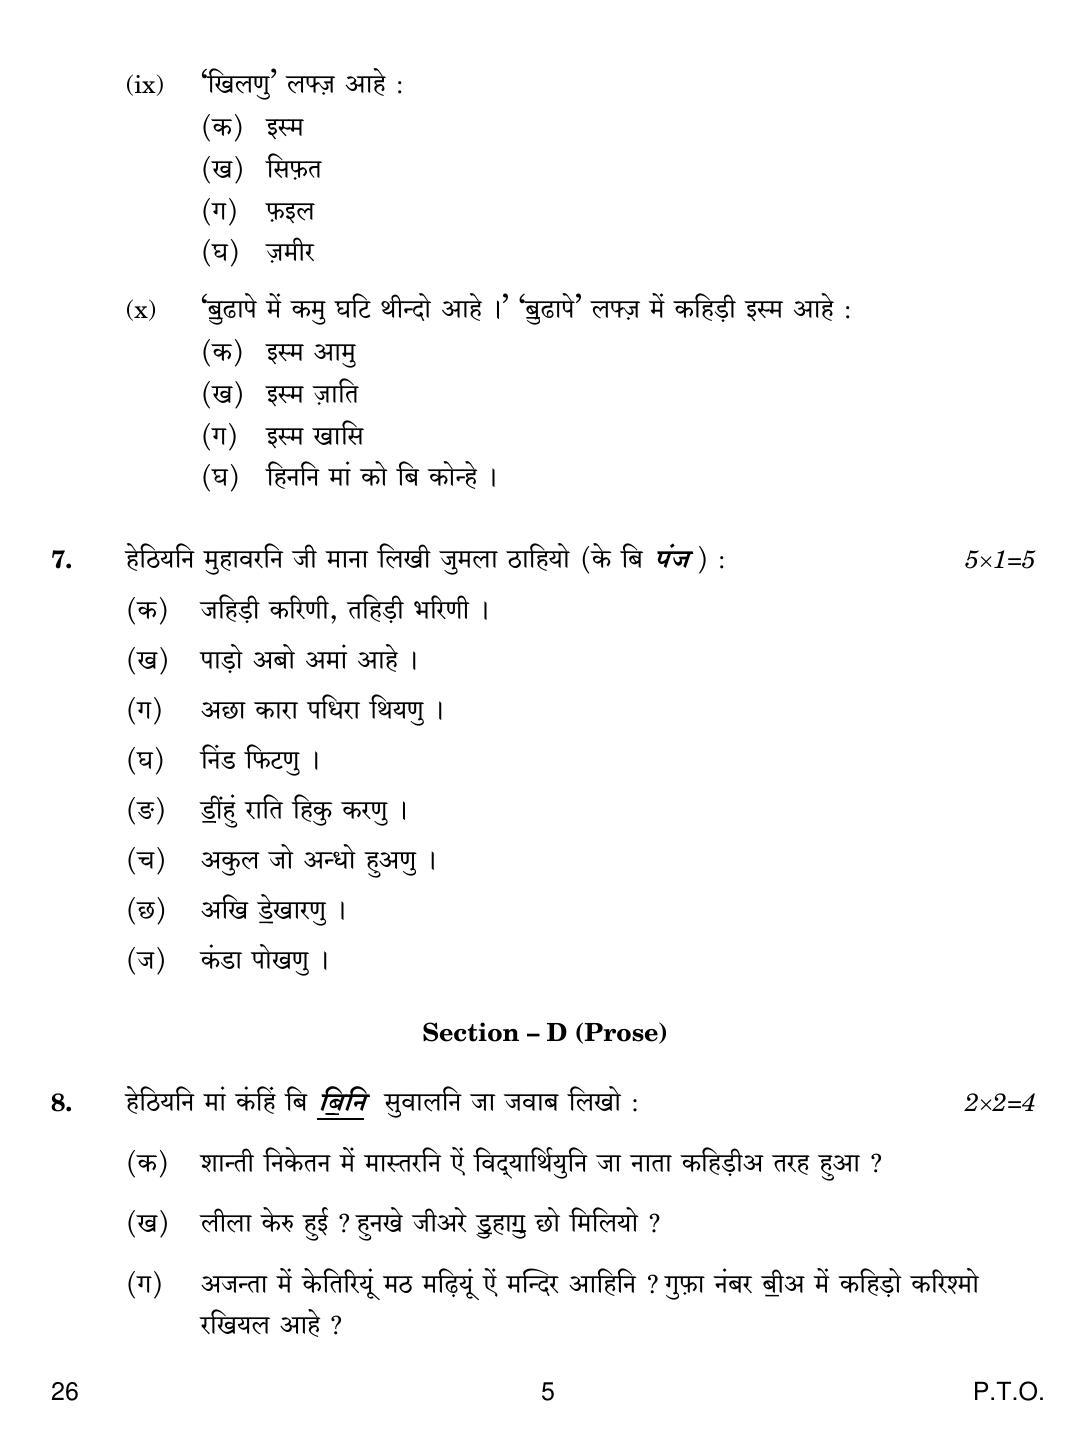 CBSE Class 10 26 SINDHI 2019 Question Paper - Page 5